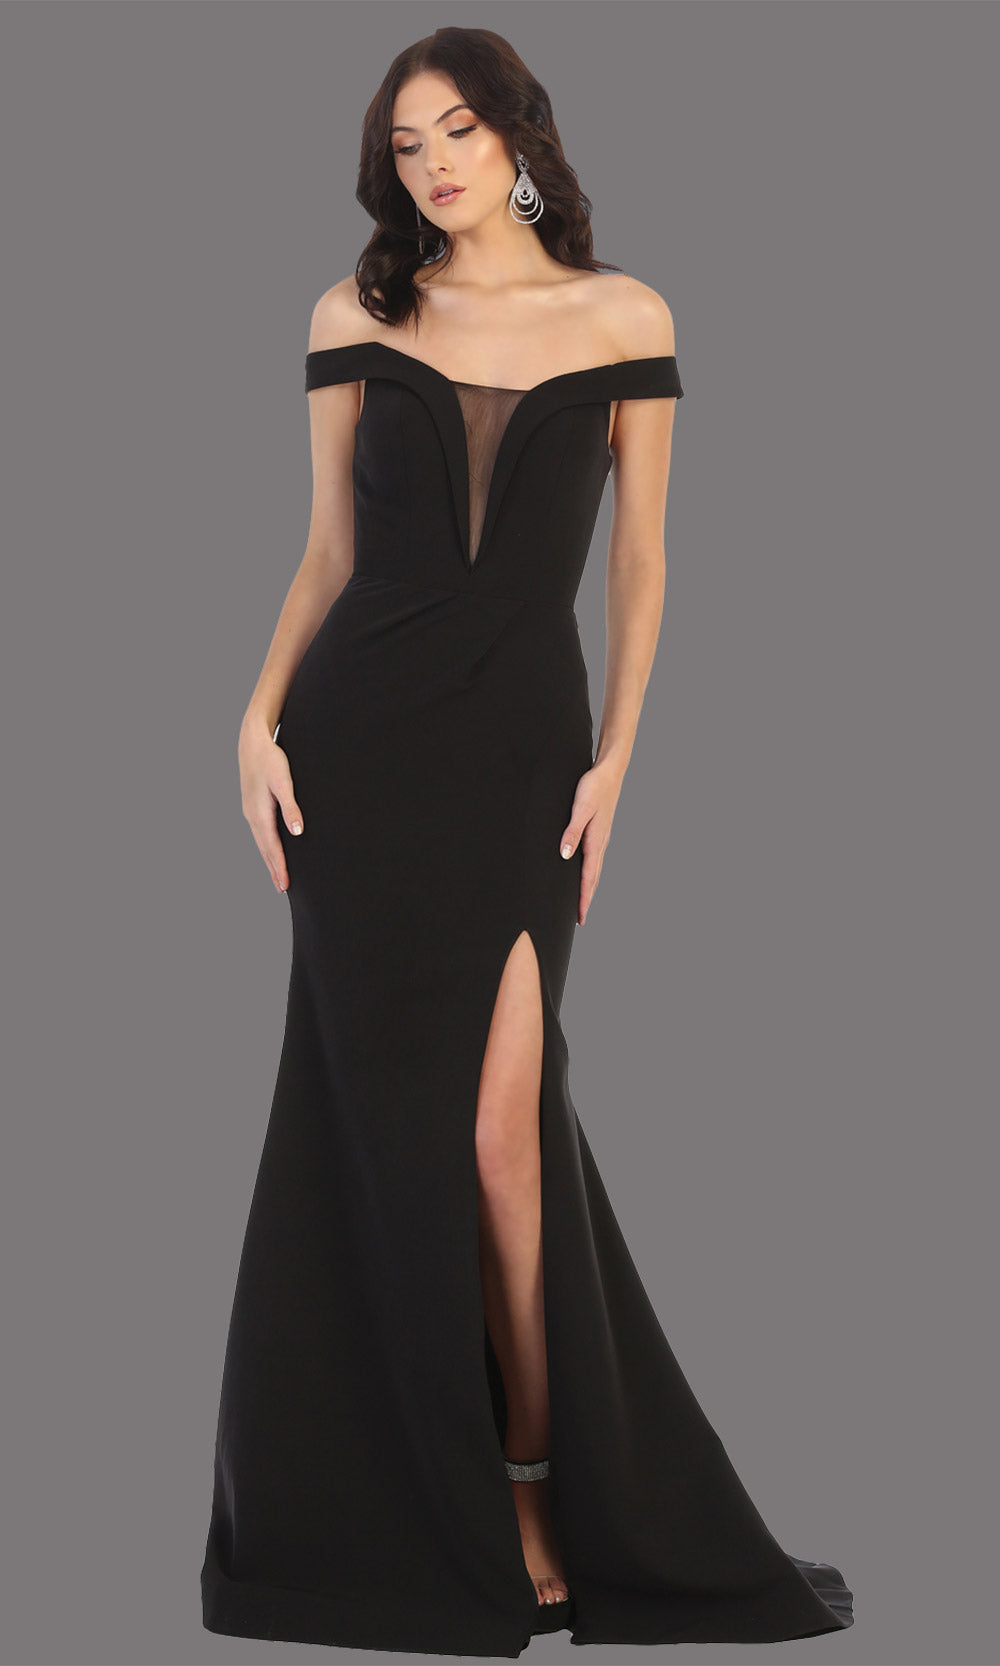 Mayqueen MQ1748 long black fitted sleek & sexy off shoulder dress w/ high slit. This black dress is perfect for bridesmaid dresses, simple wedding guest dress, prom dress, gala, black tie wedding. Plus sizes are available, evening party dress.jpg